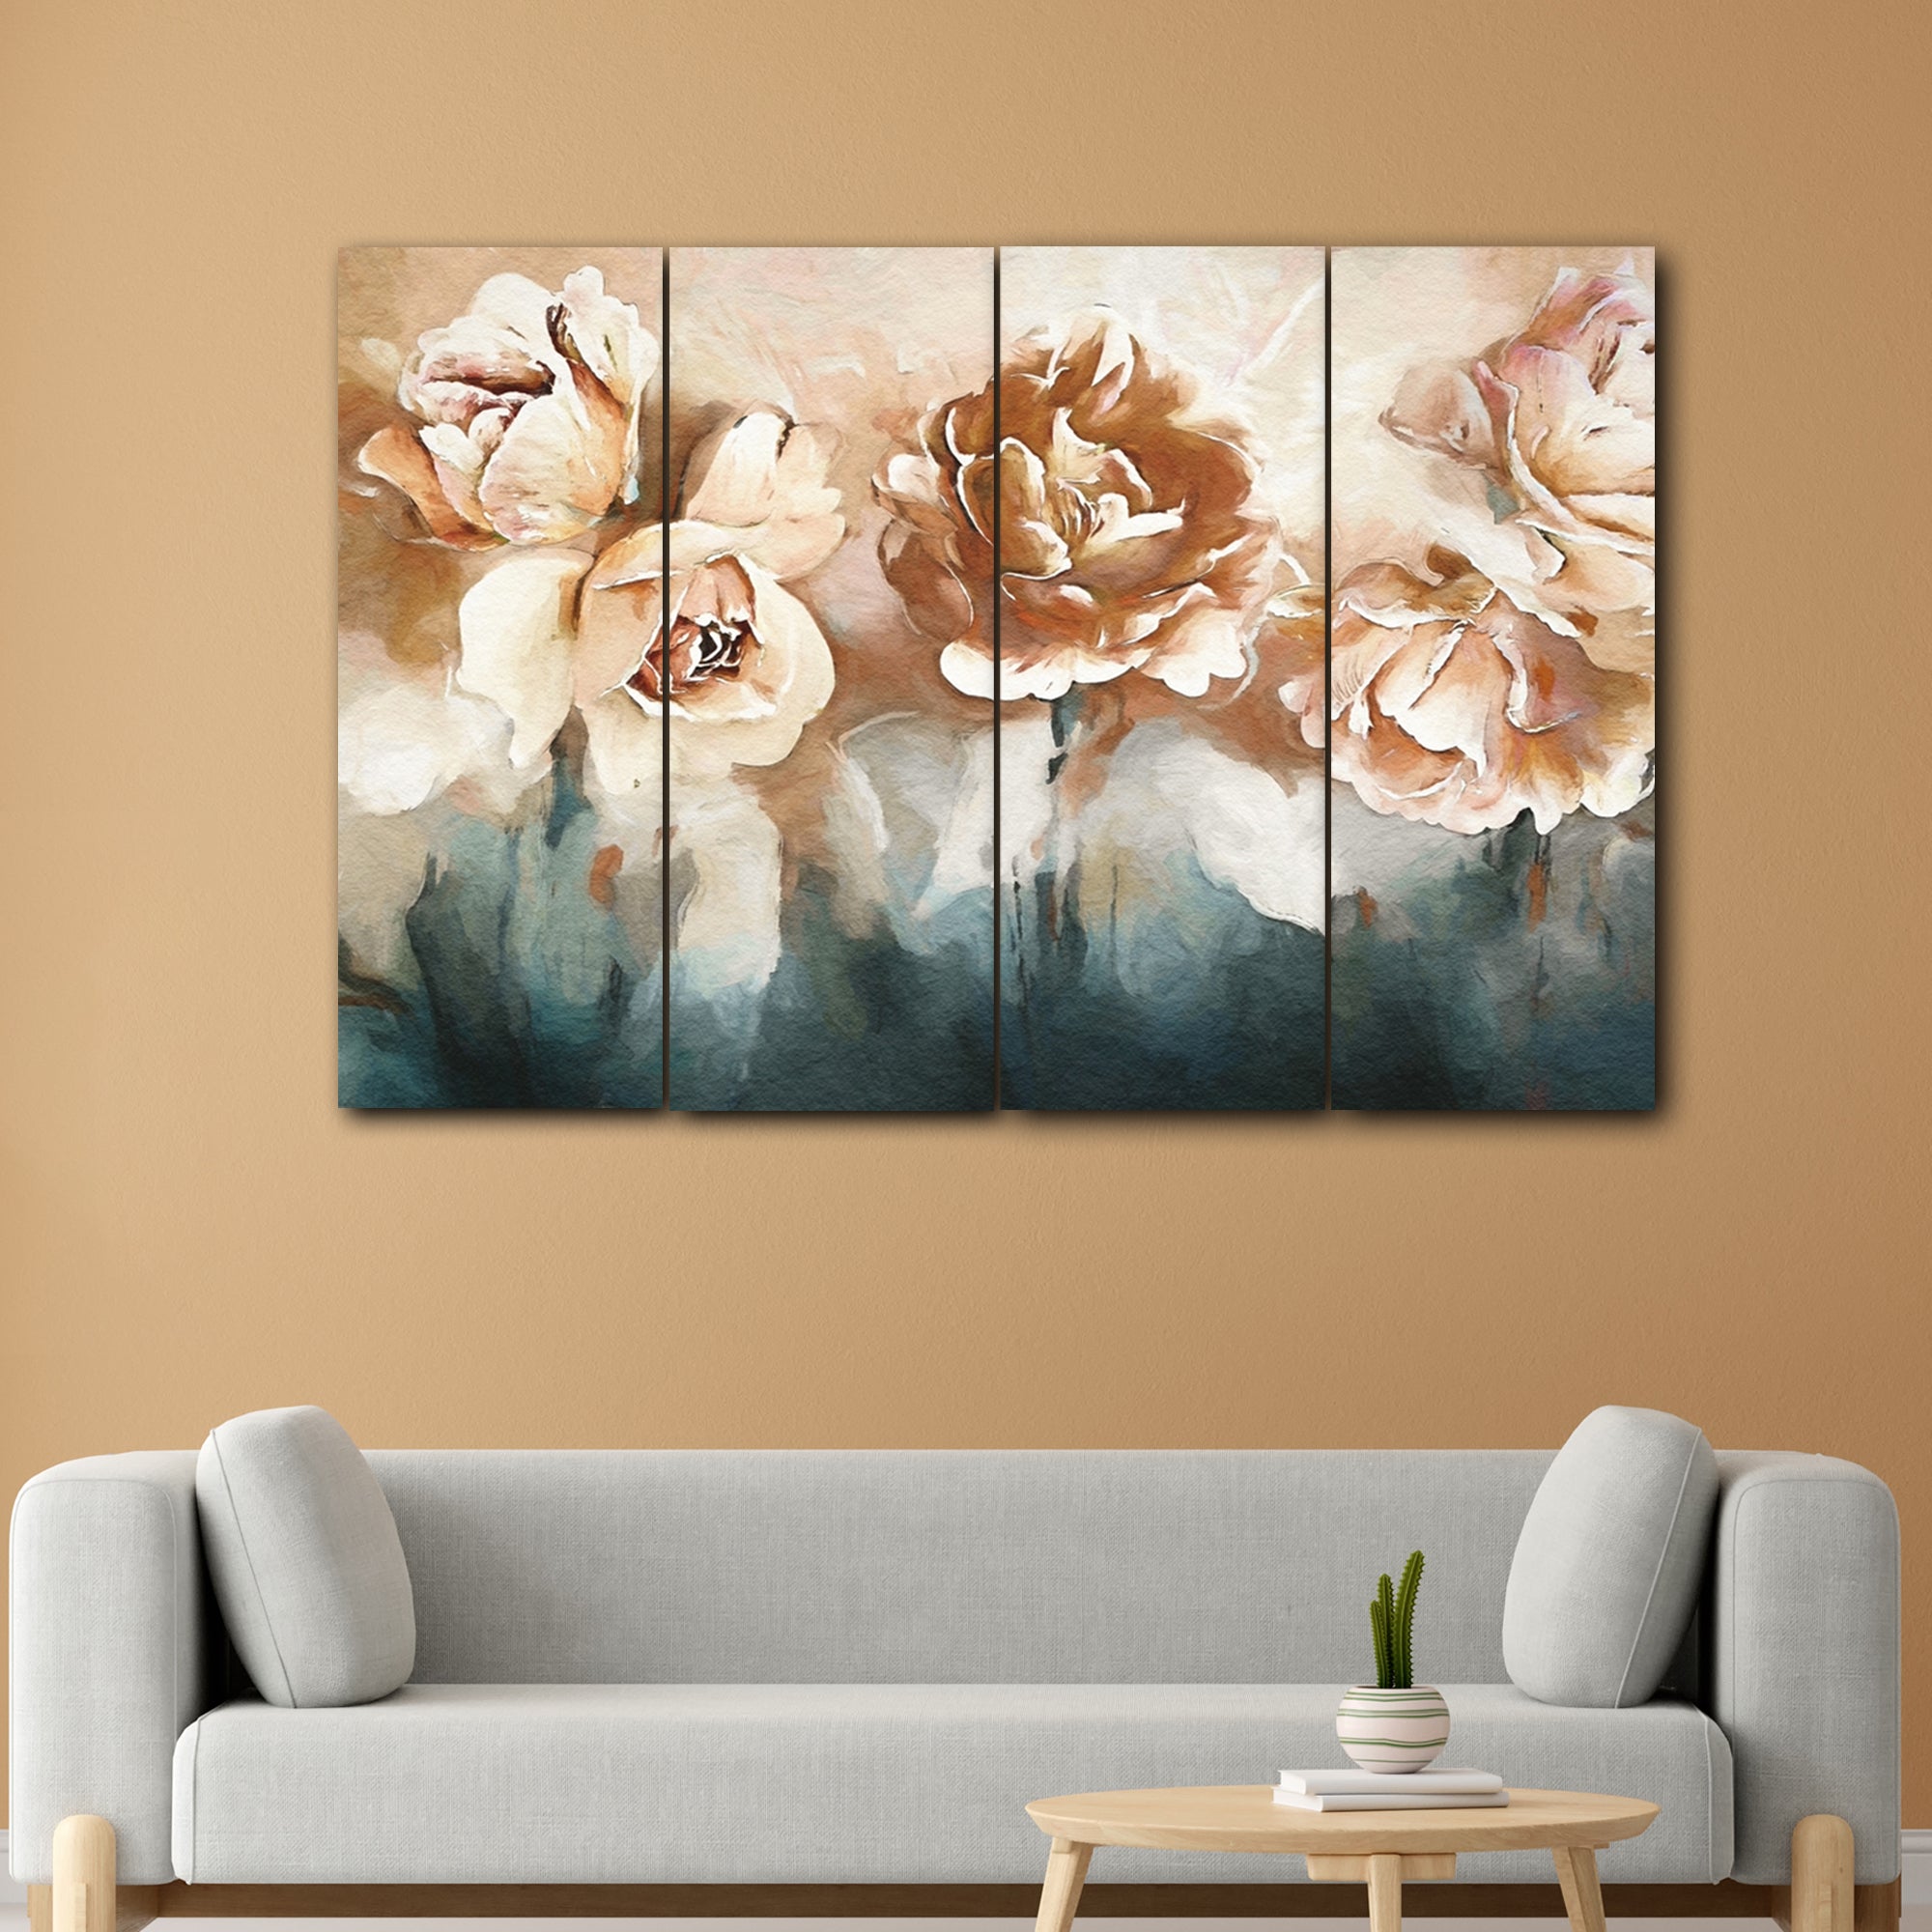 Abstract Rose Flower In 4 Panel Painting